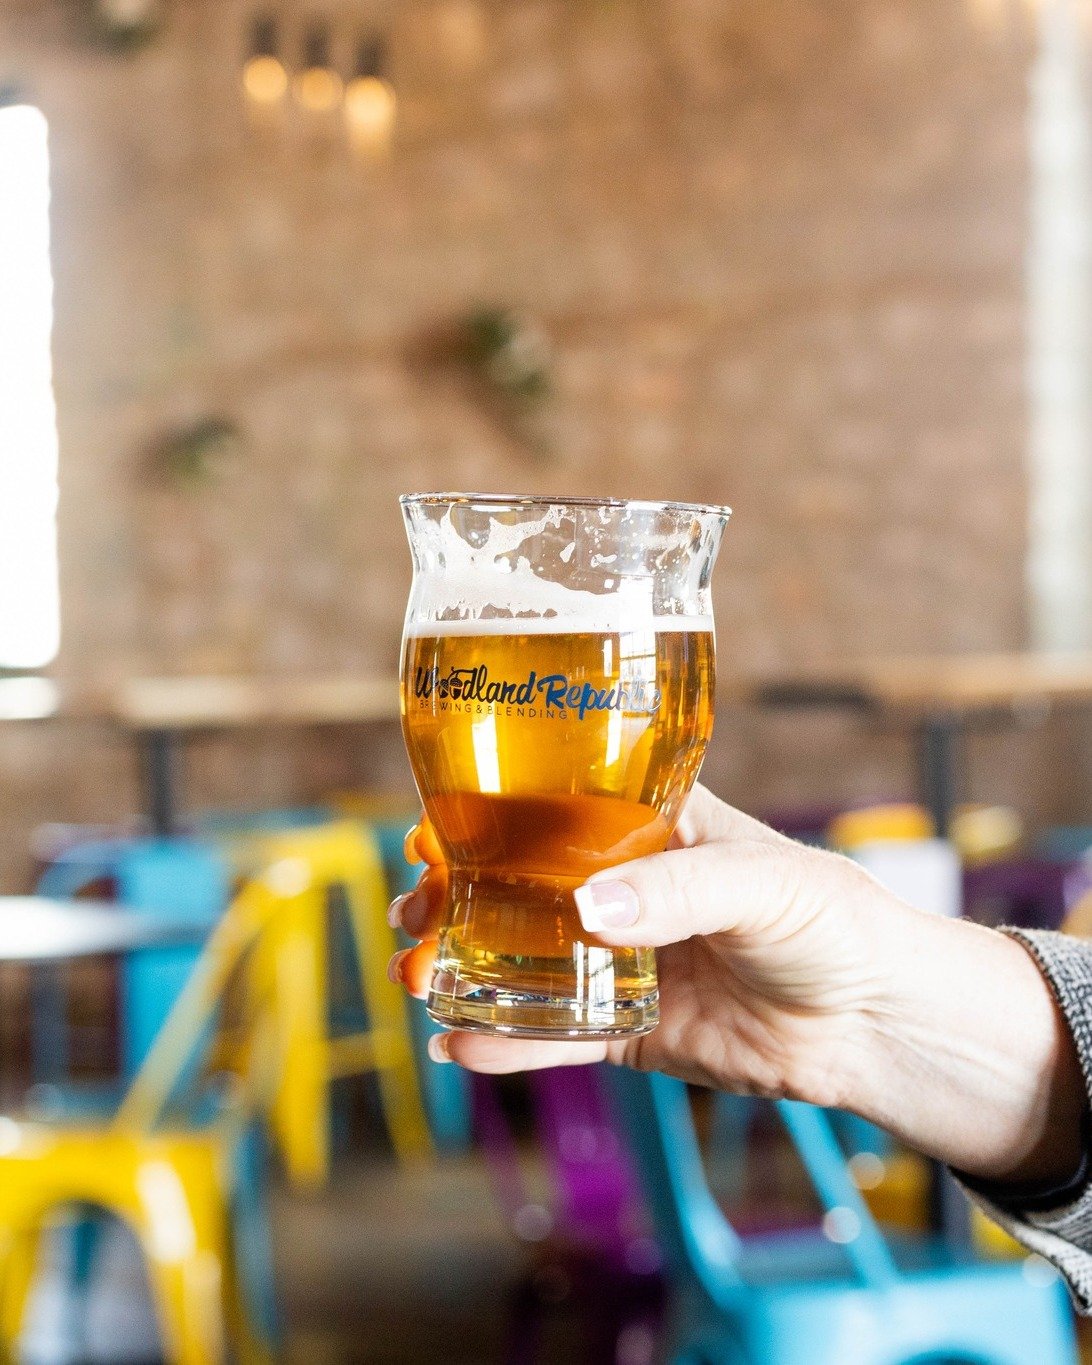 Downtown Rapid City is the perfect place for a cheers with a local brew! 🍻 Our latest blog gives you the inside scoop on 3 local spots to check out! Full blog at the link in our bio, prost! 
#downtowntrapidcity